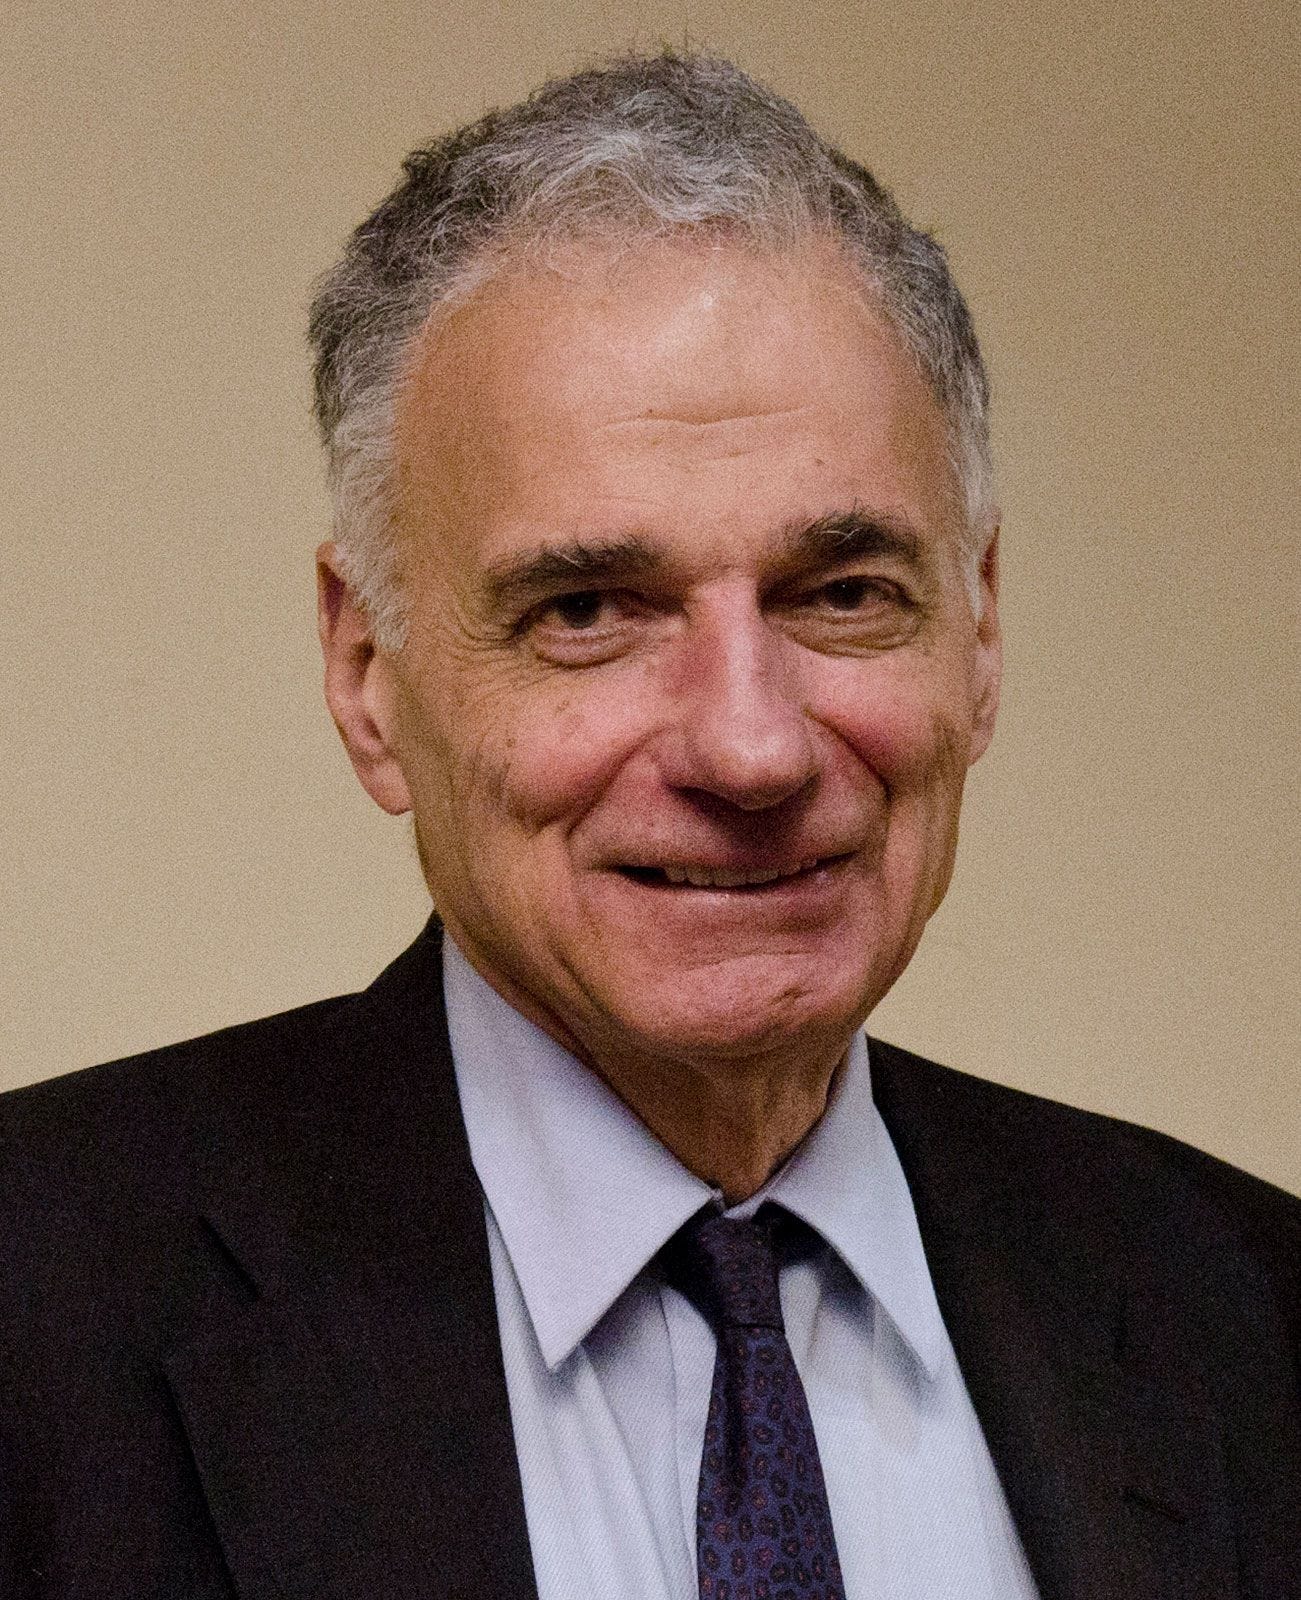 Ralph Nader | Biography, Unsafe at Any Speed, & Facts | Britannica